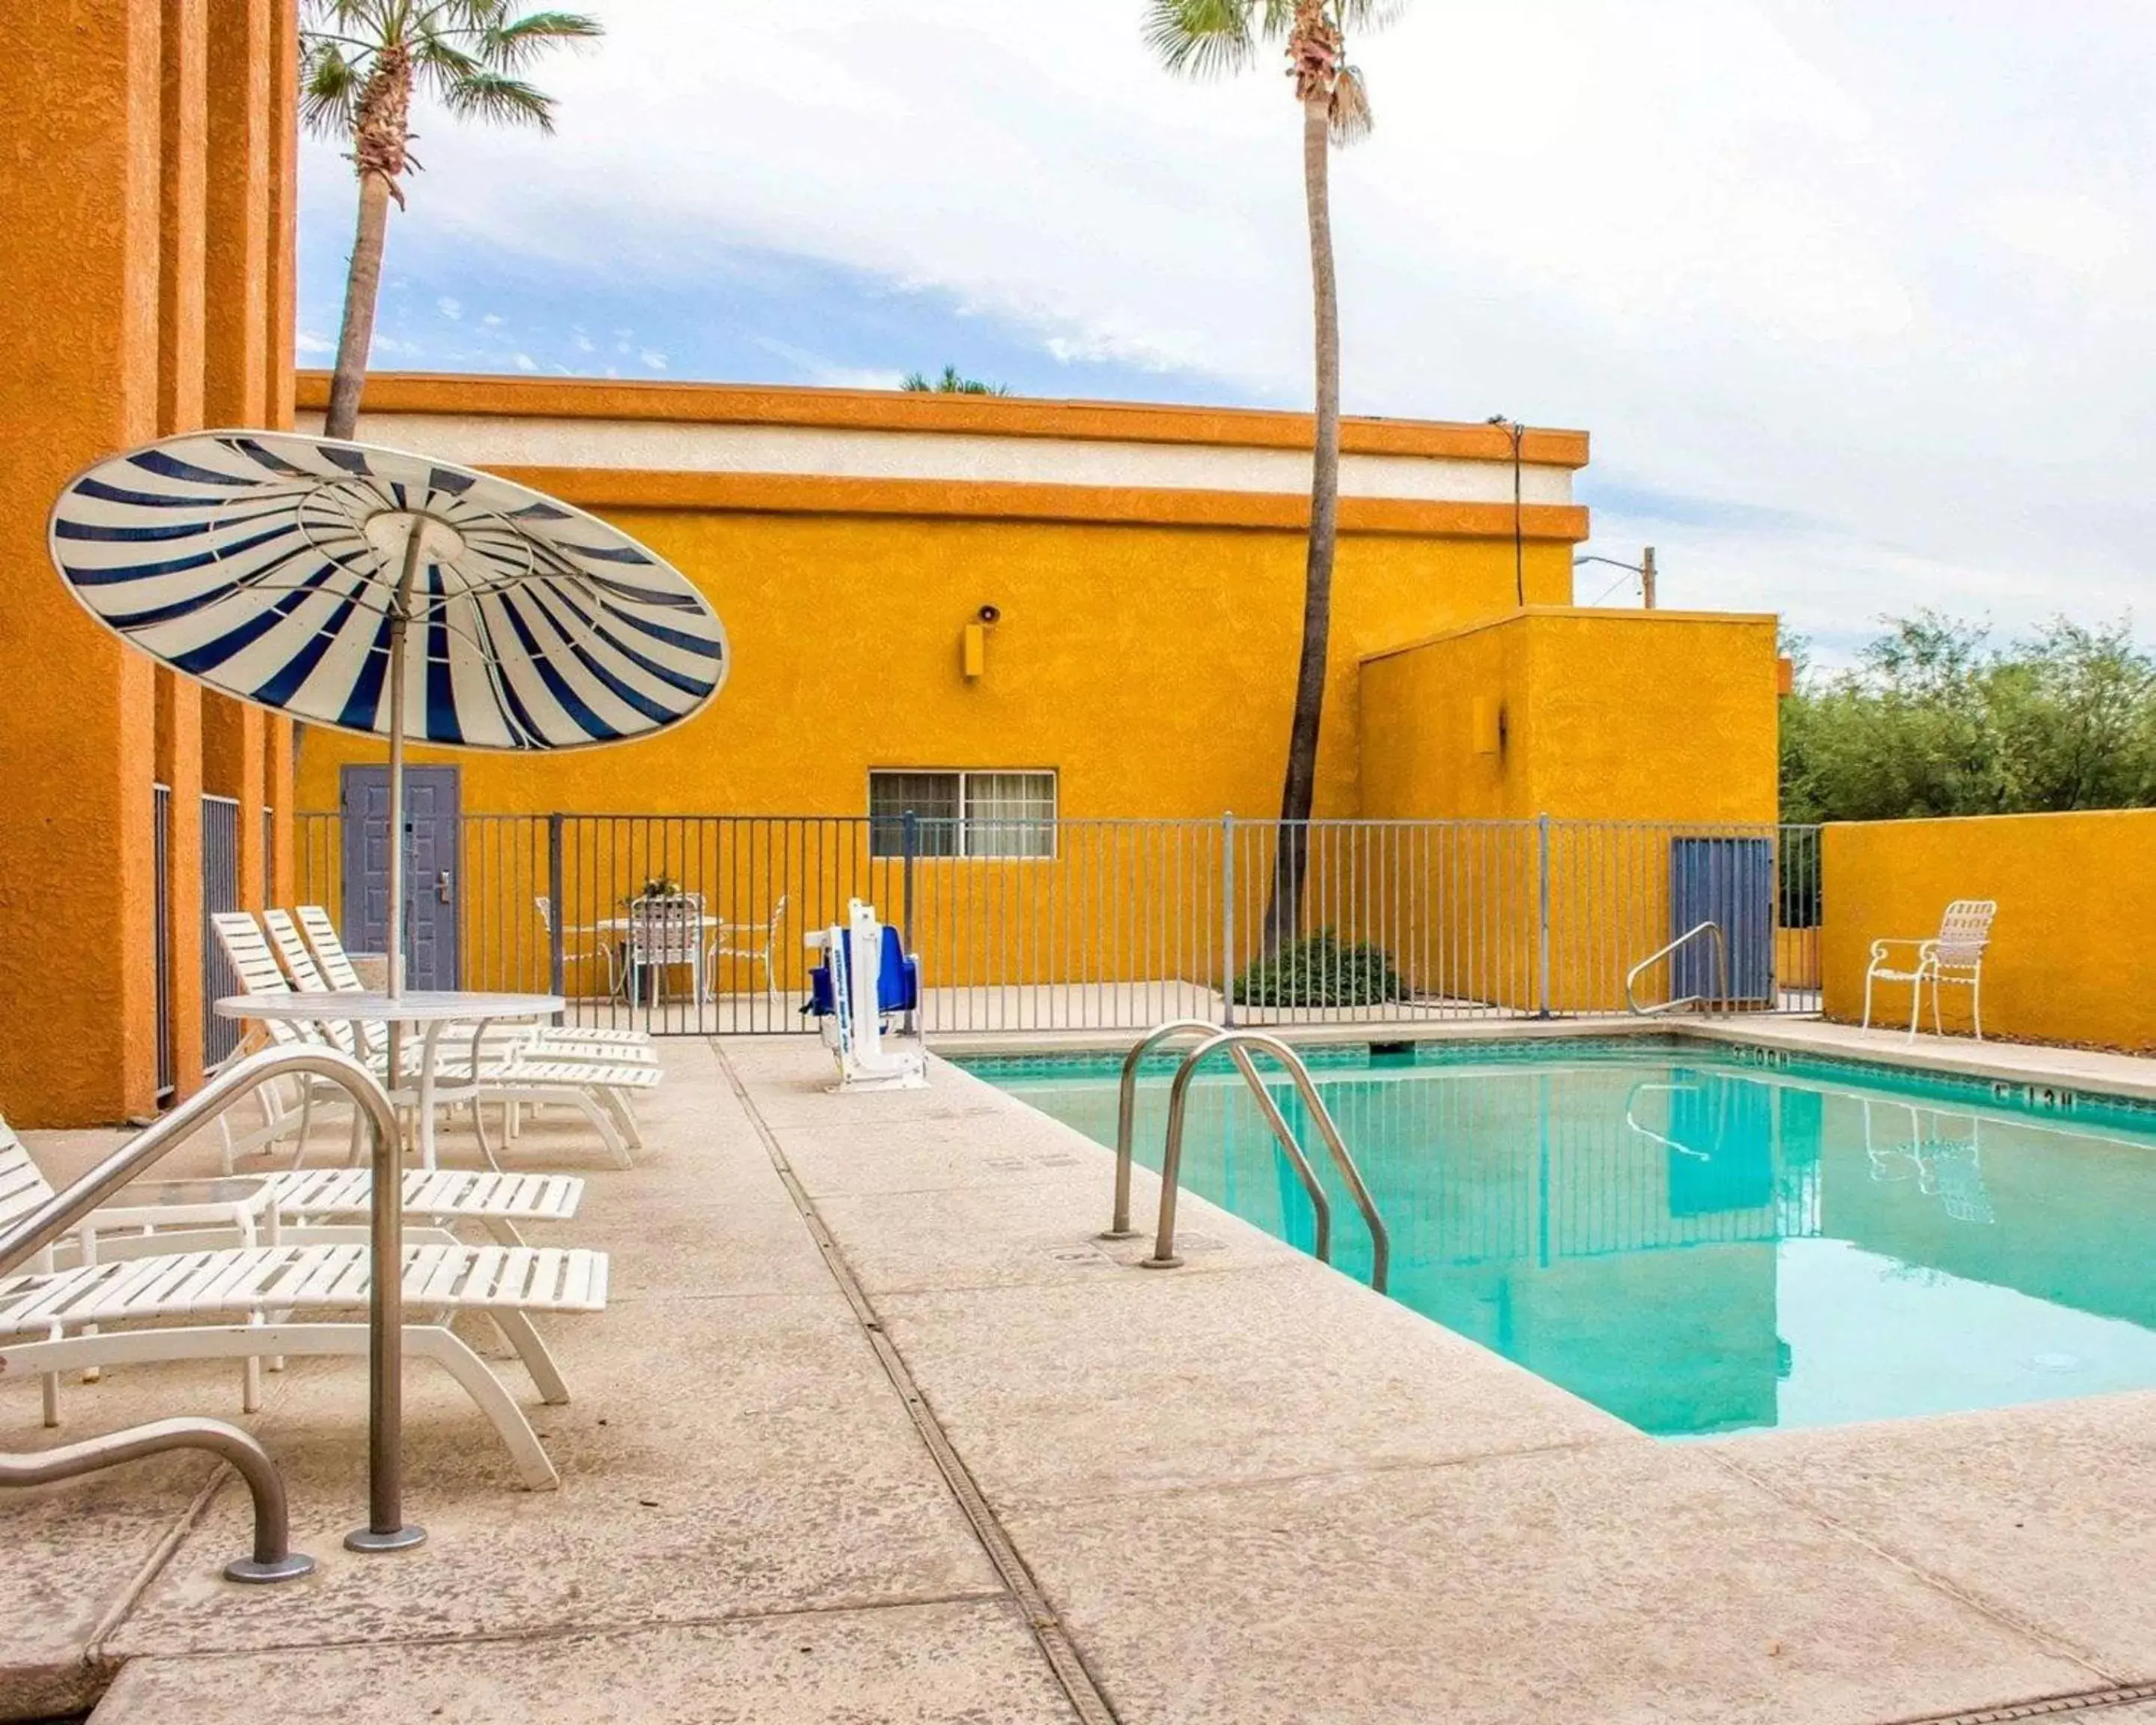 On site, Swimming Pool in Quality Inn - Tucson Airport